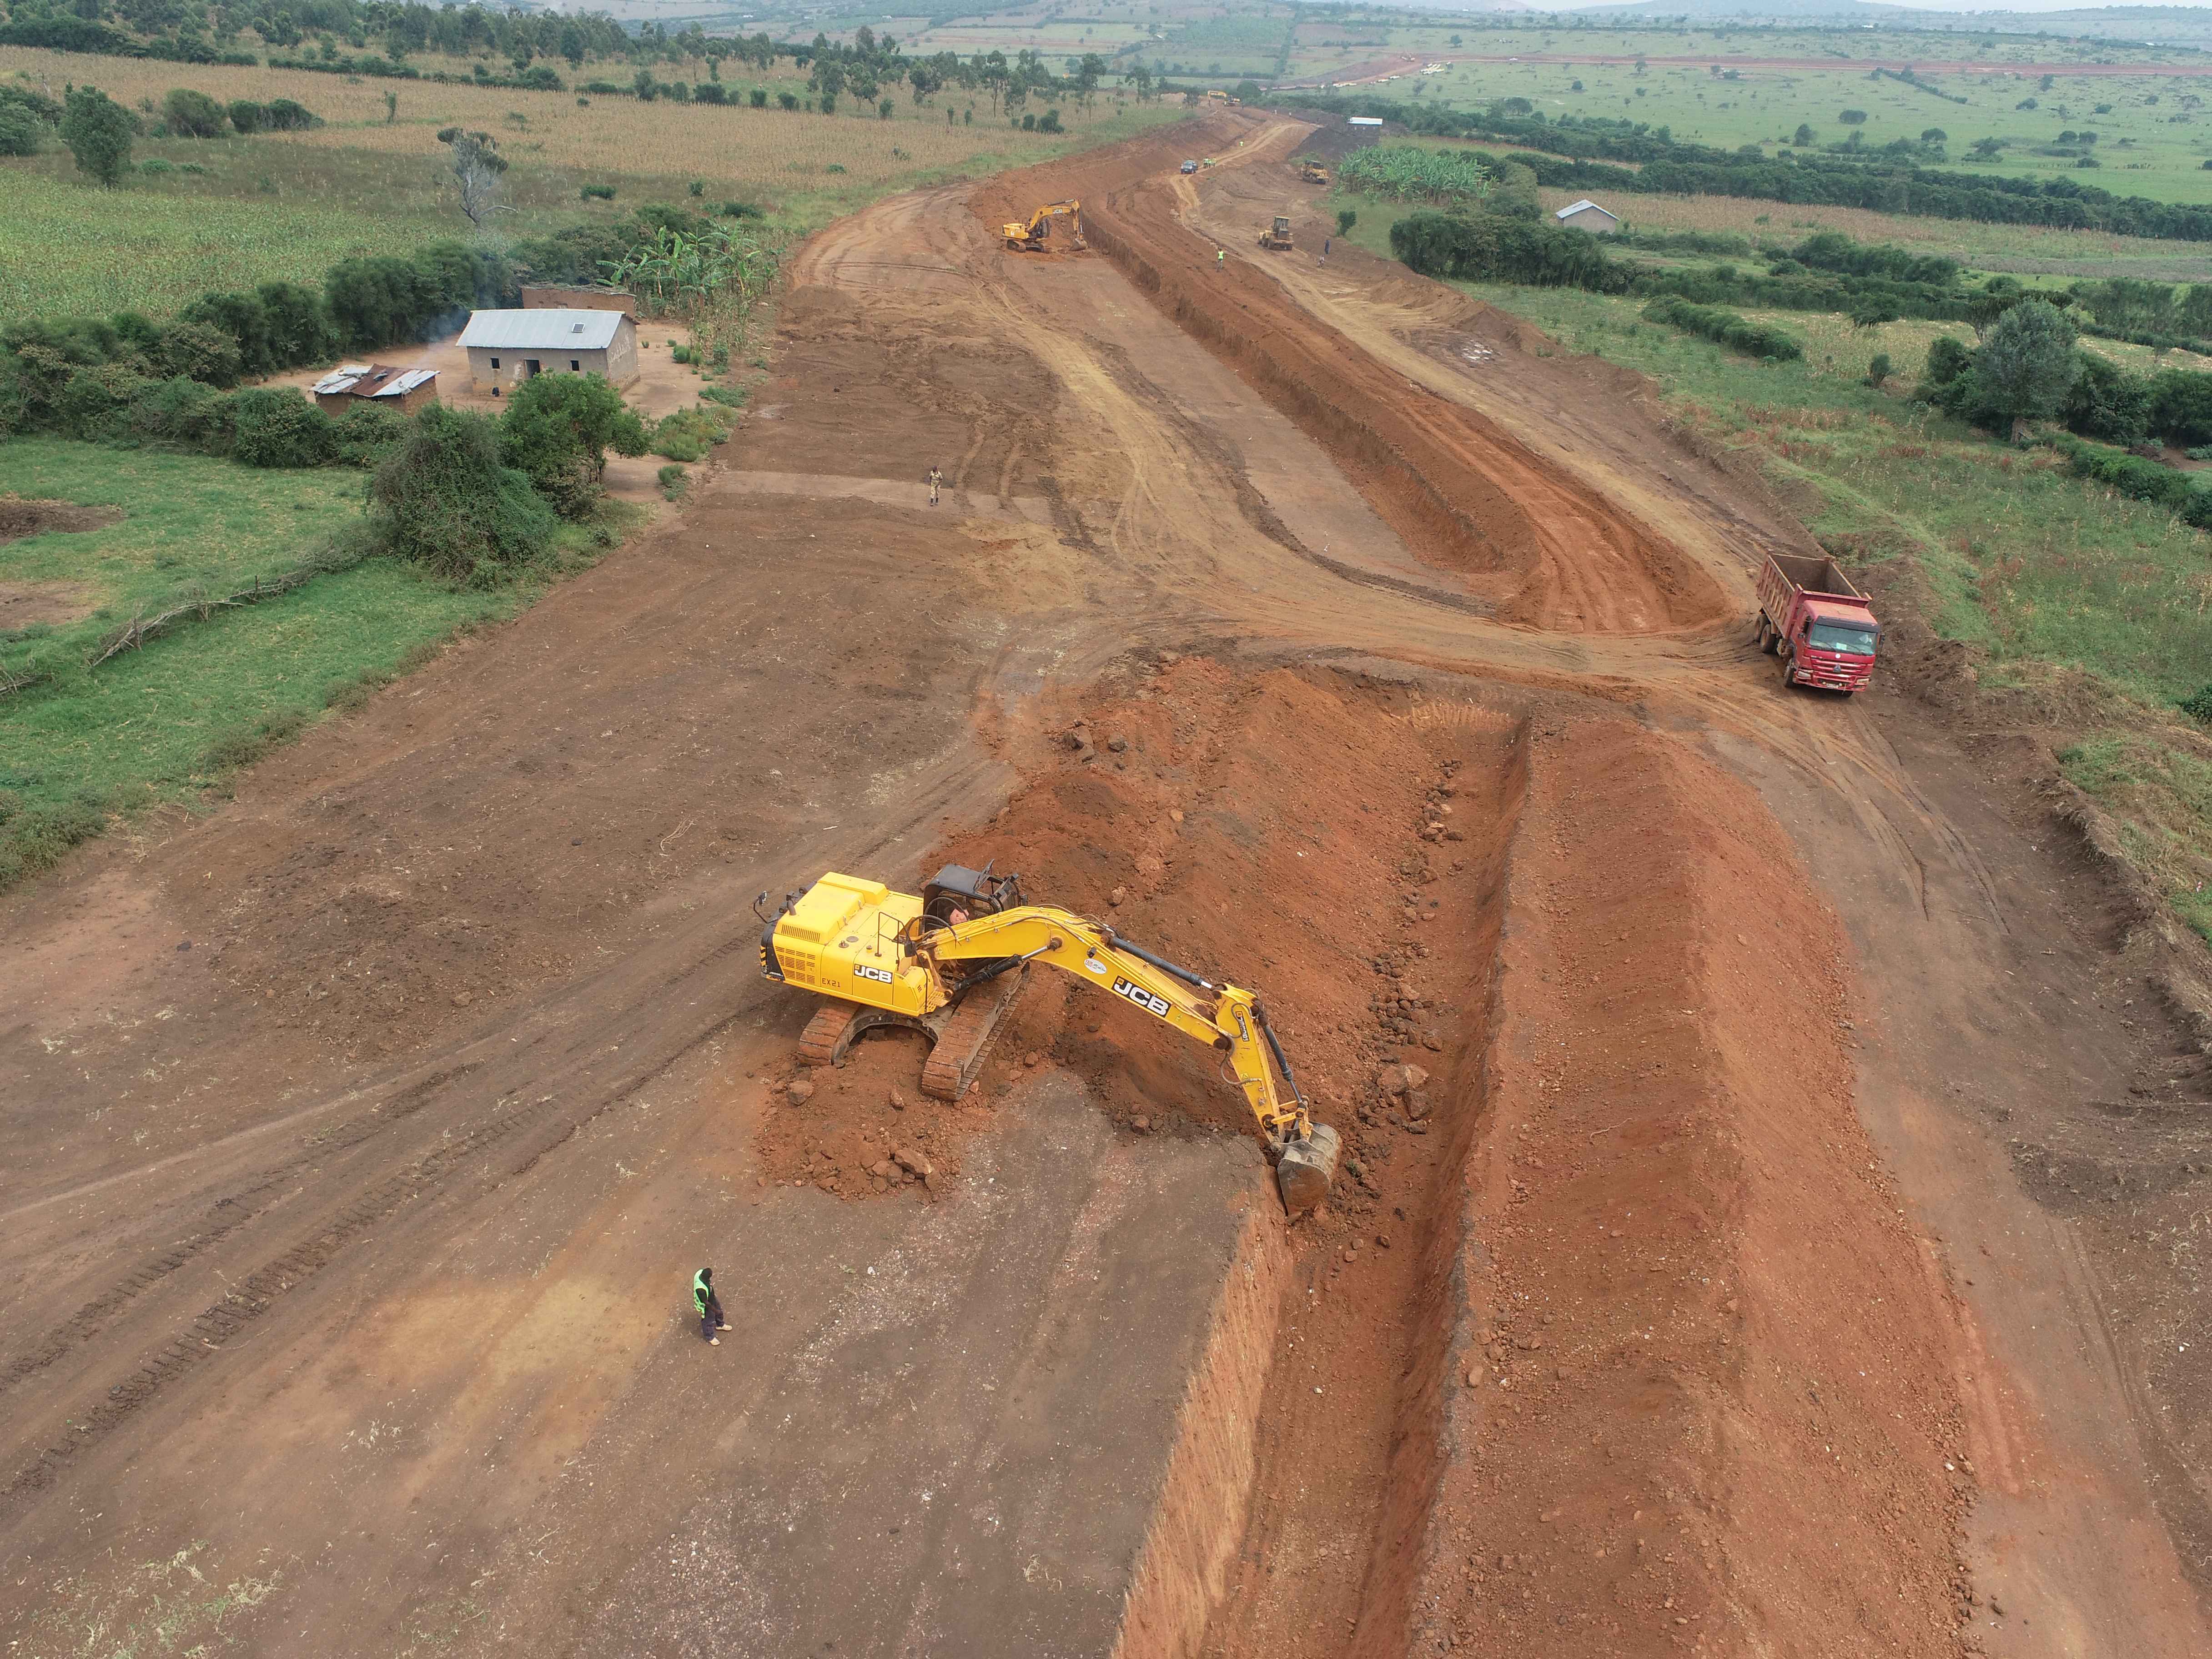 Tractor digging canal for irrigation in Rwanda